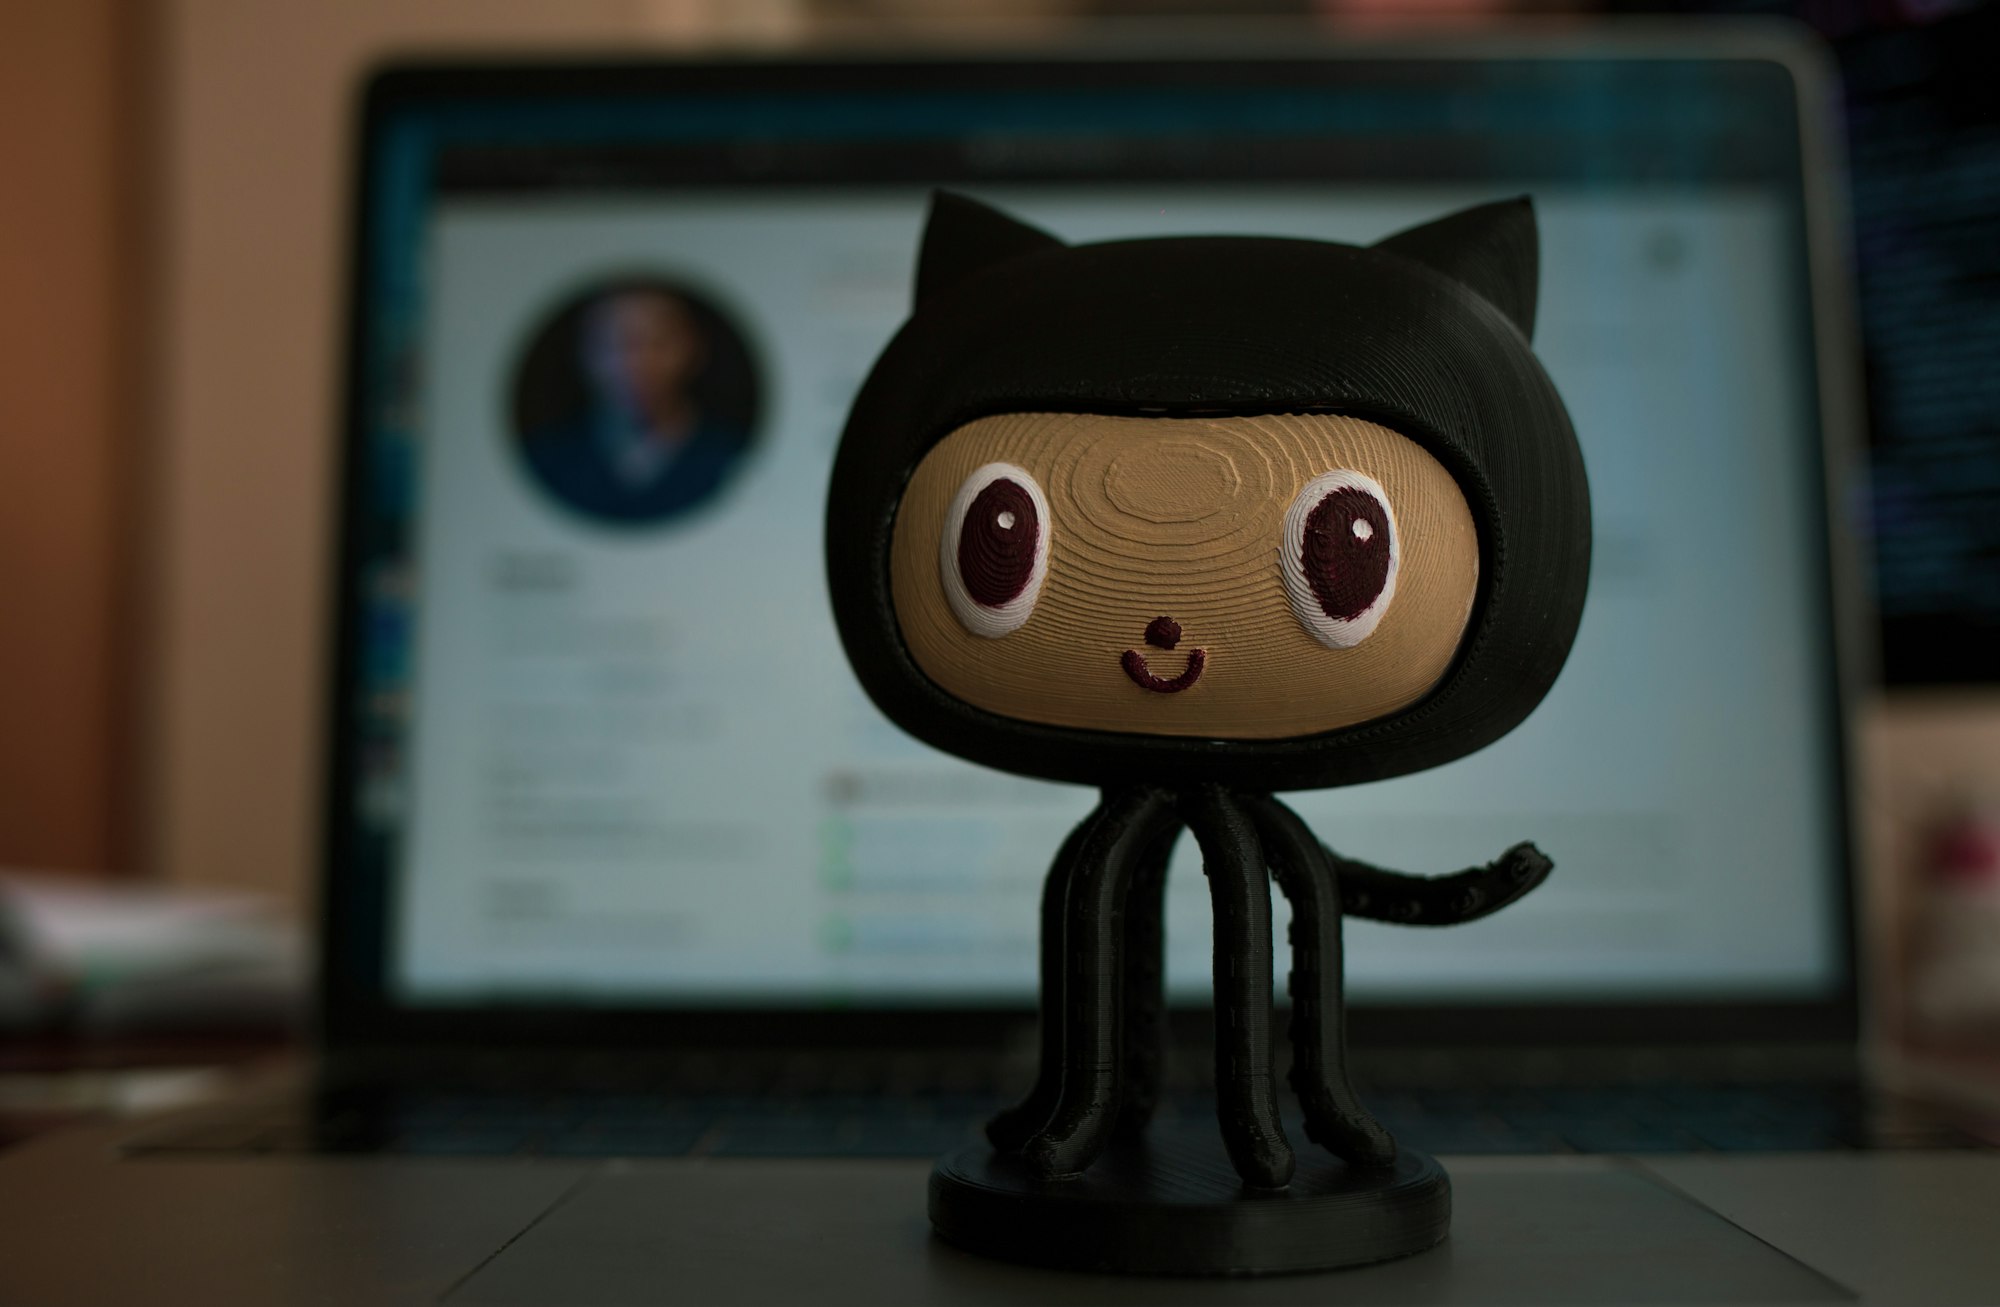 Top Stories: GitHub’s AI chatbot is now available to all users globally